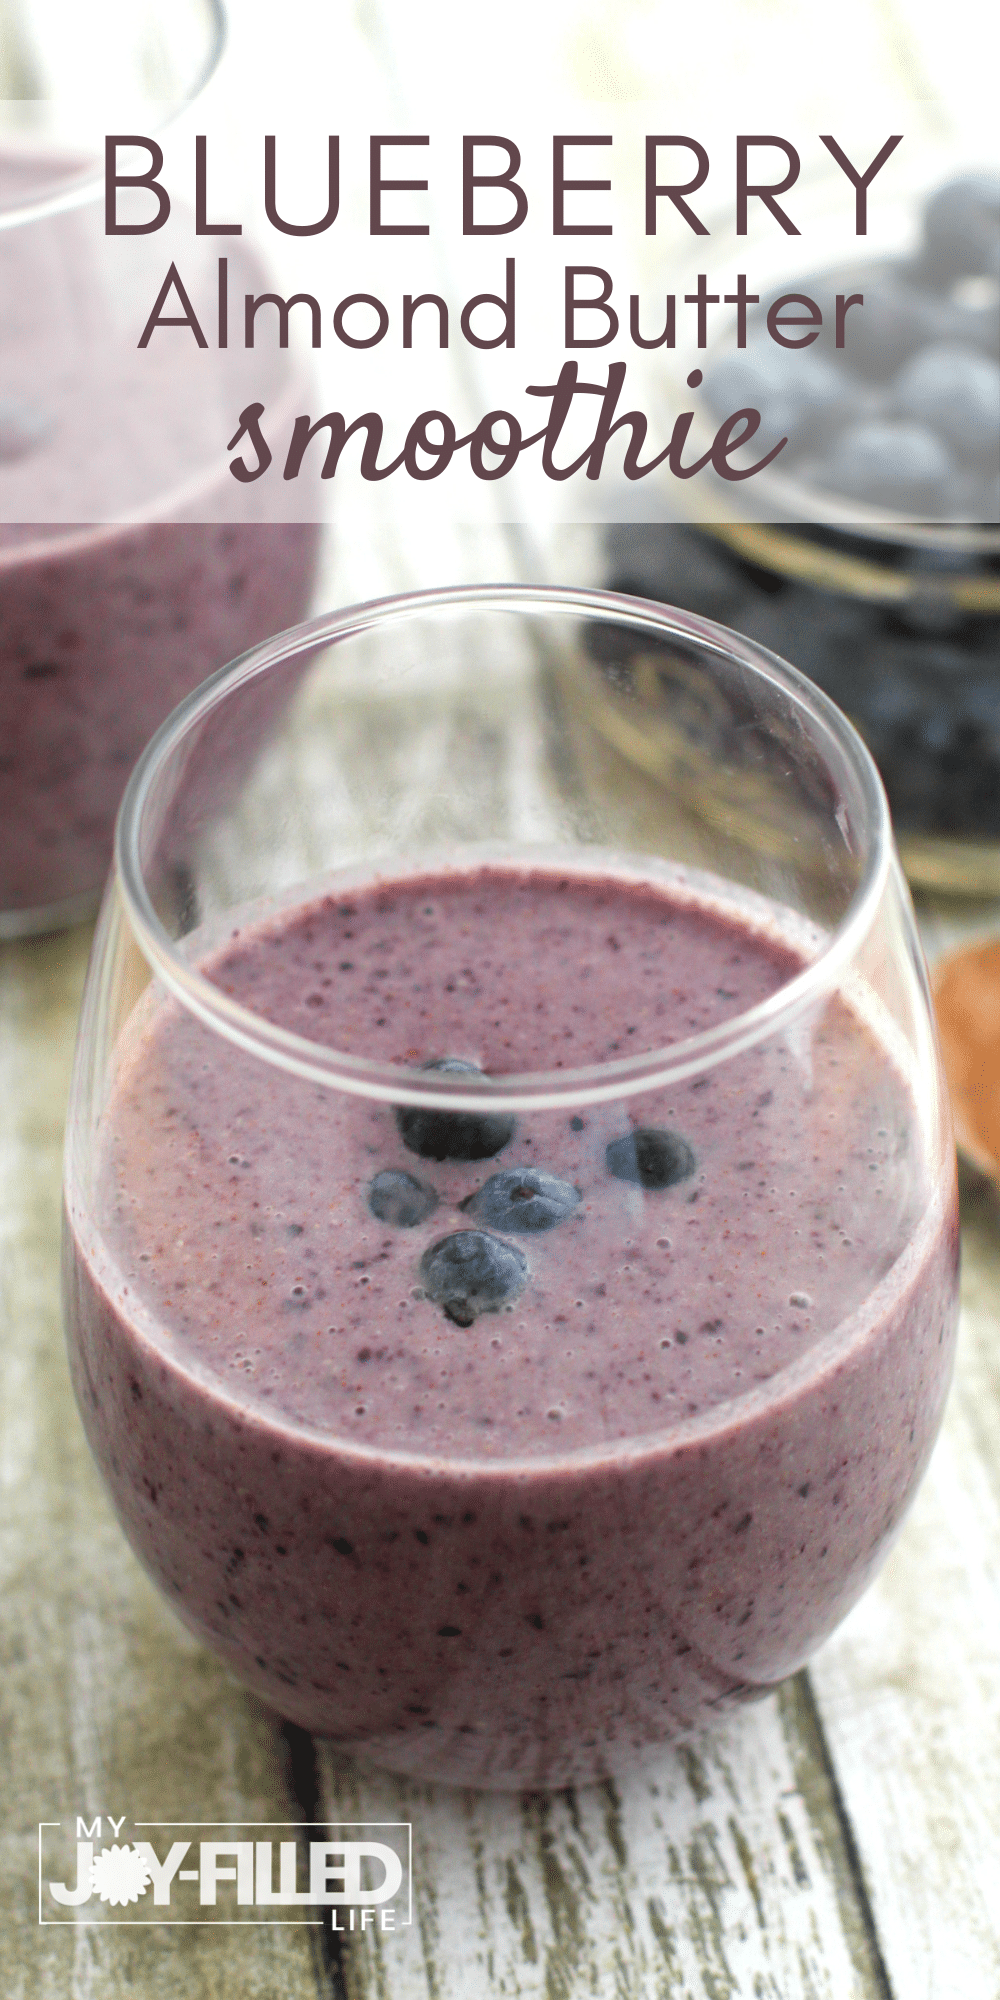 Blueberry Almond Butter Smoothie Recipe